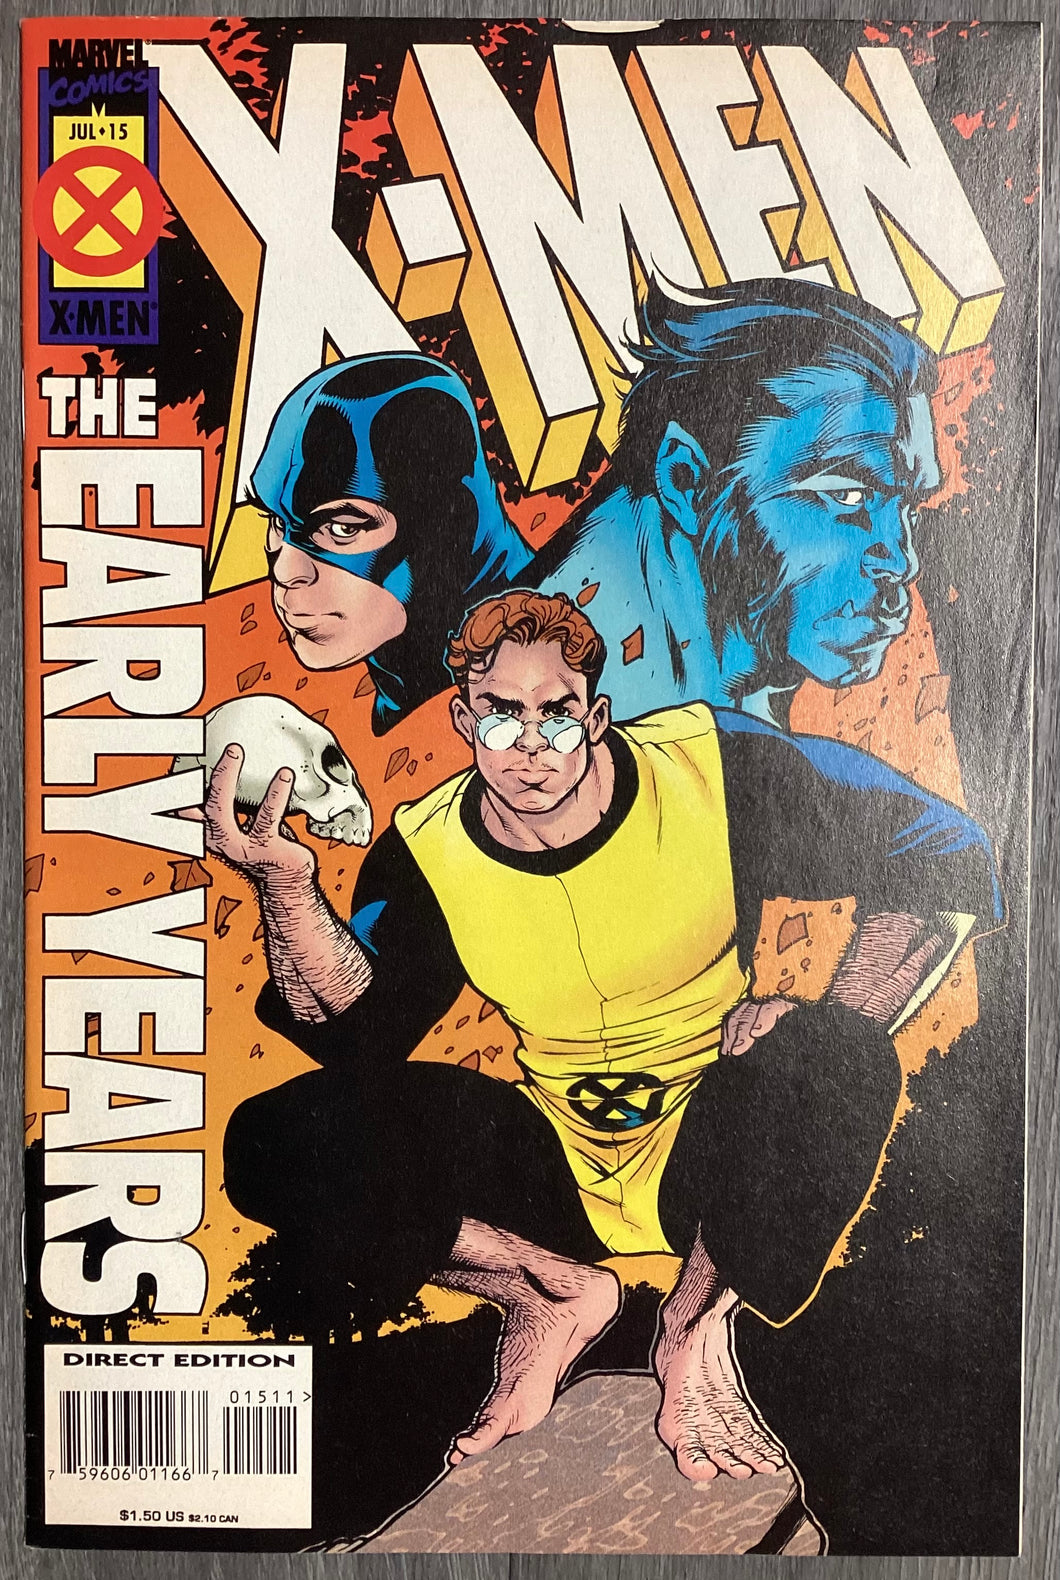 X-Men: The Early Years No. #15 1995 Marvel Comics